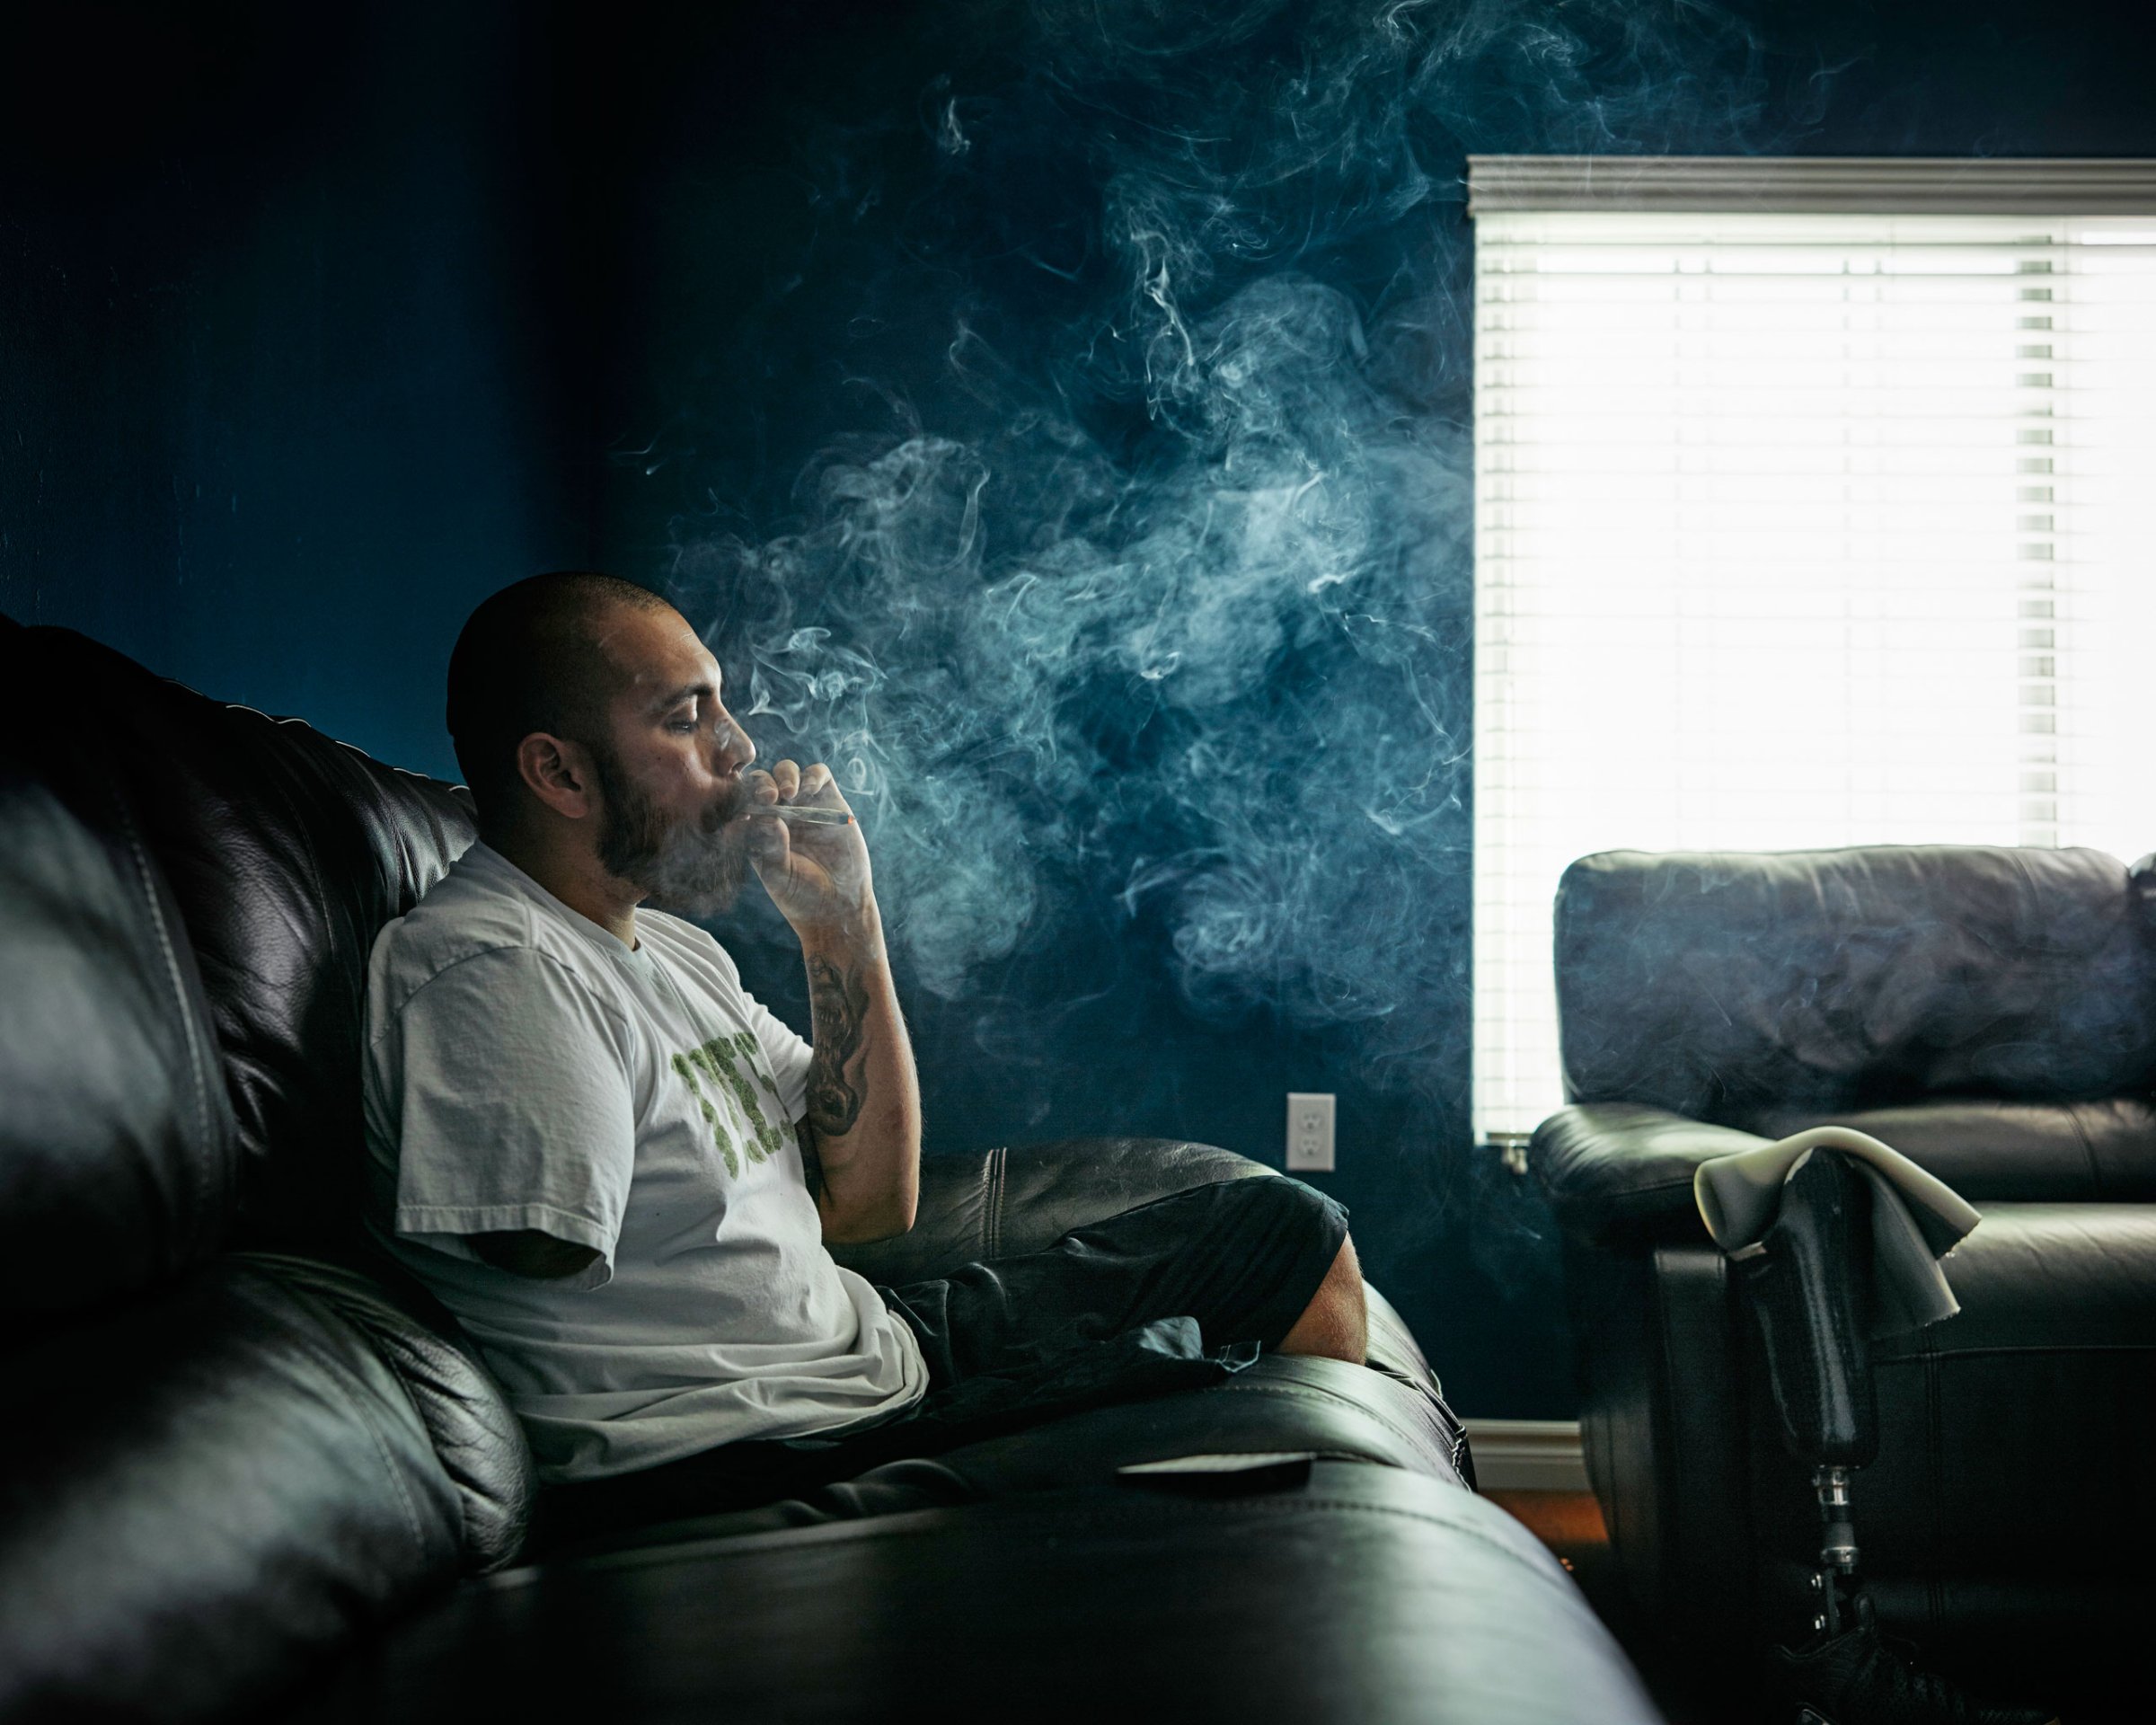 Army veteran Jose Martinez smokes marijuana in his California home; he says it eases the PTSD and pain from his 2012 trauma in Afghanistan